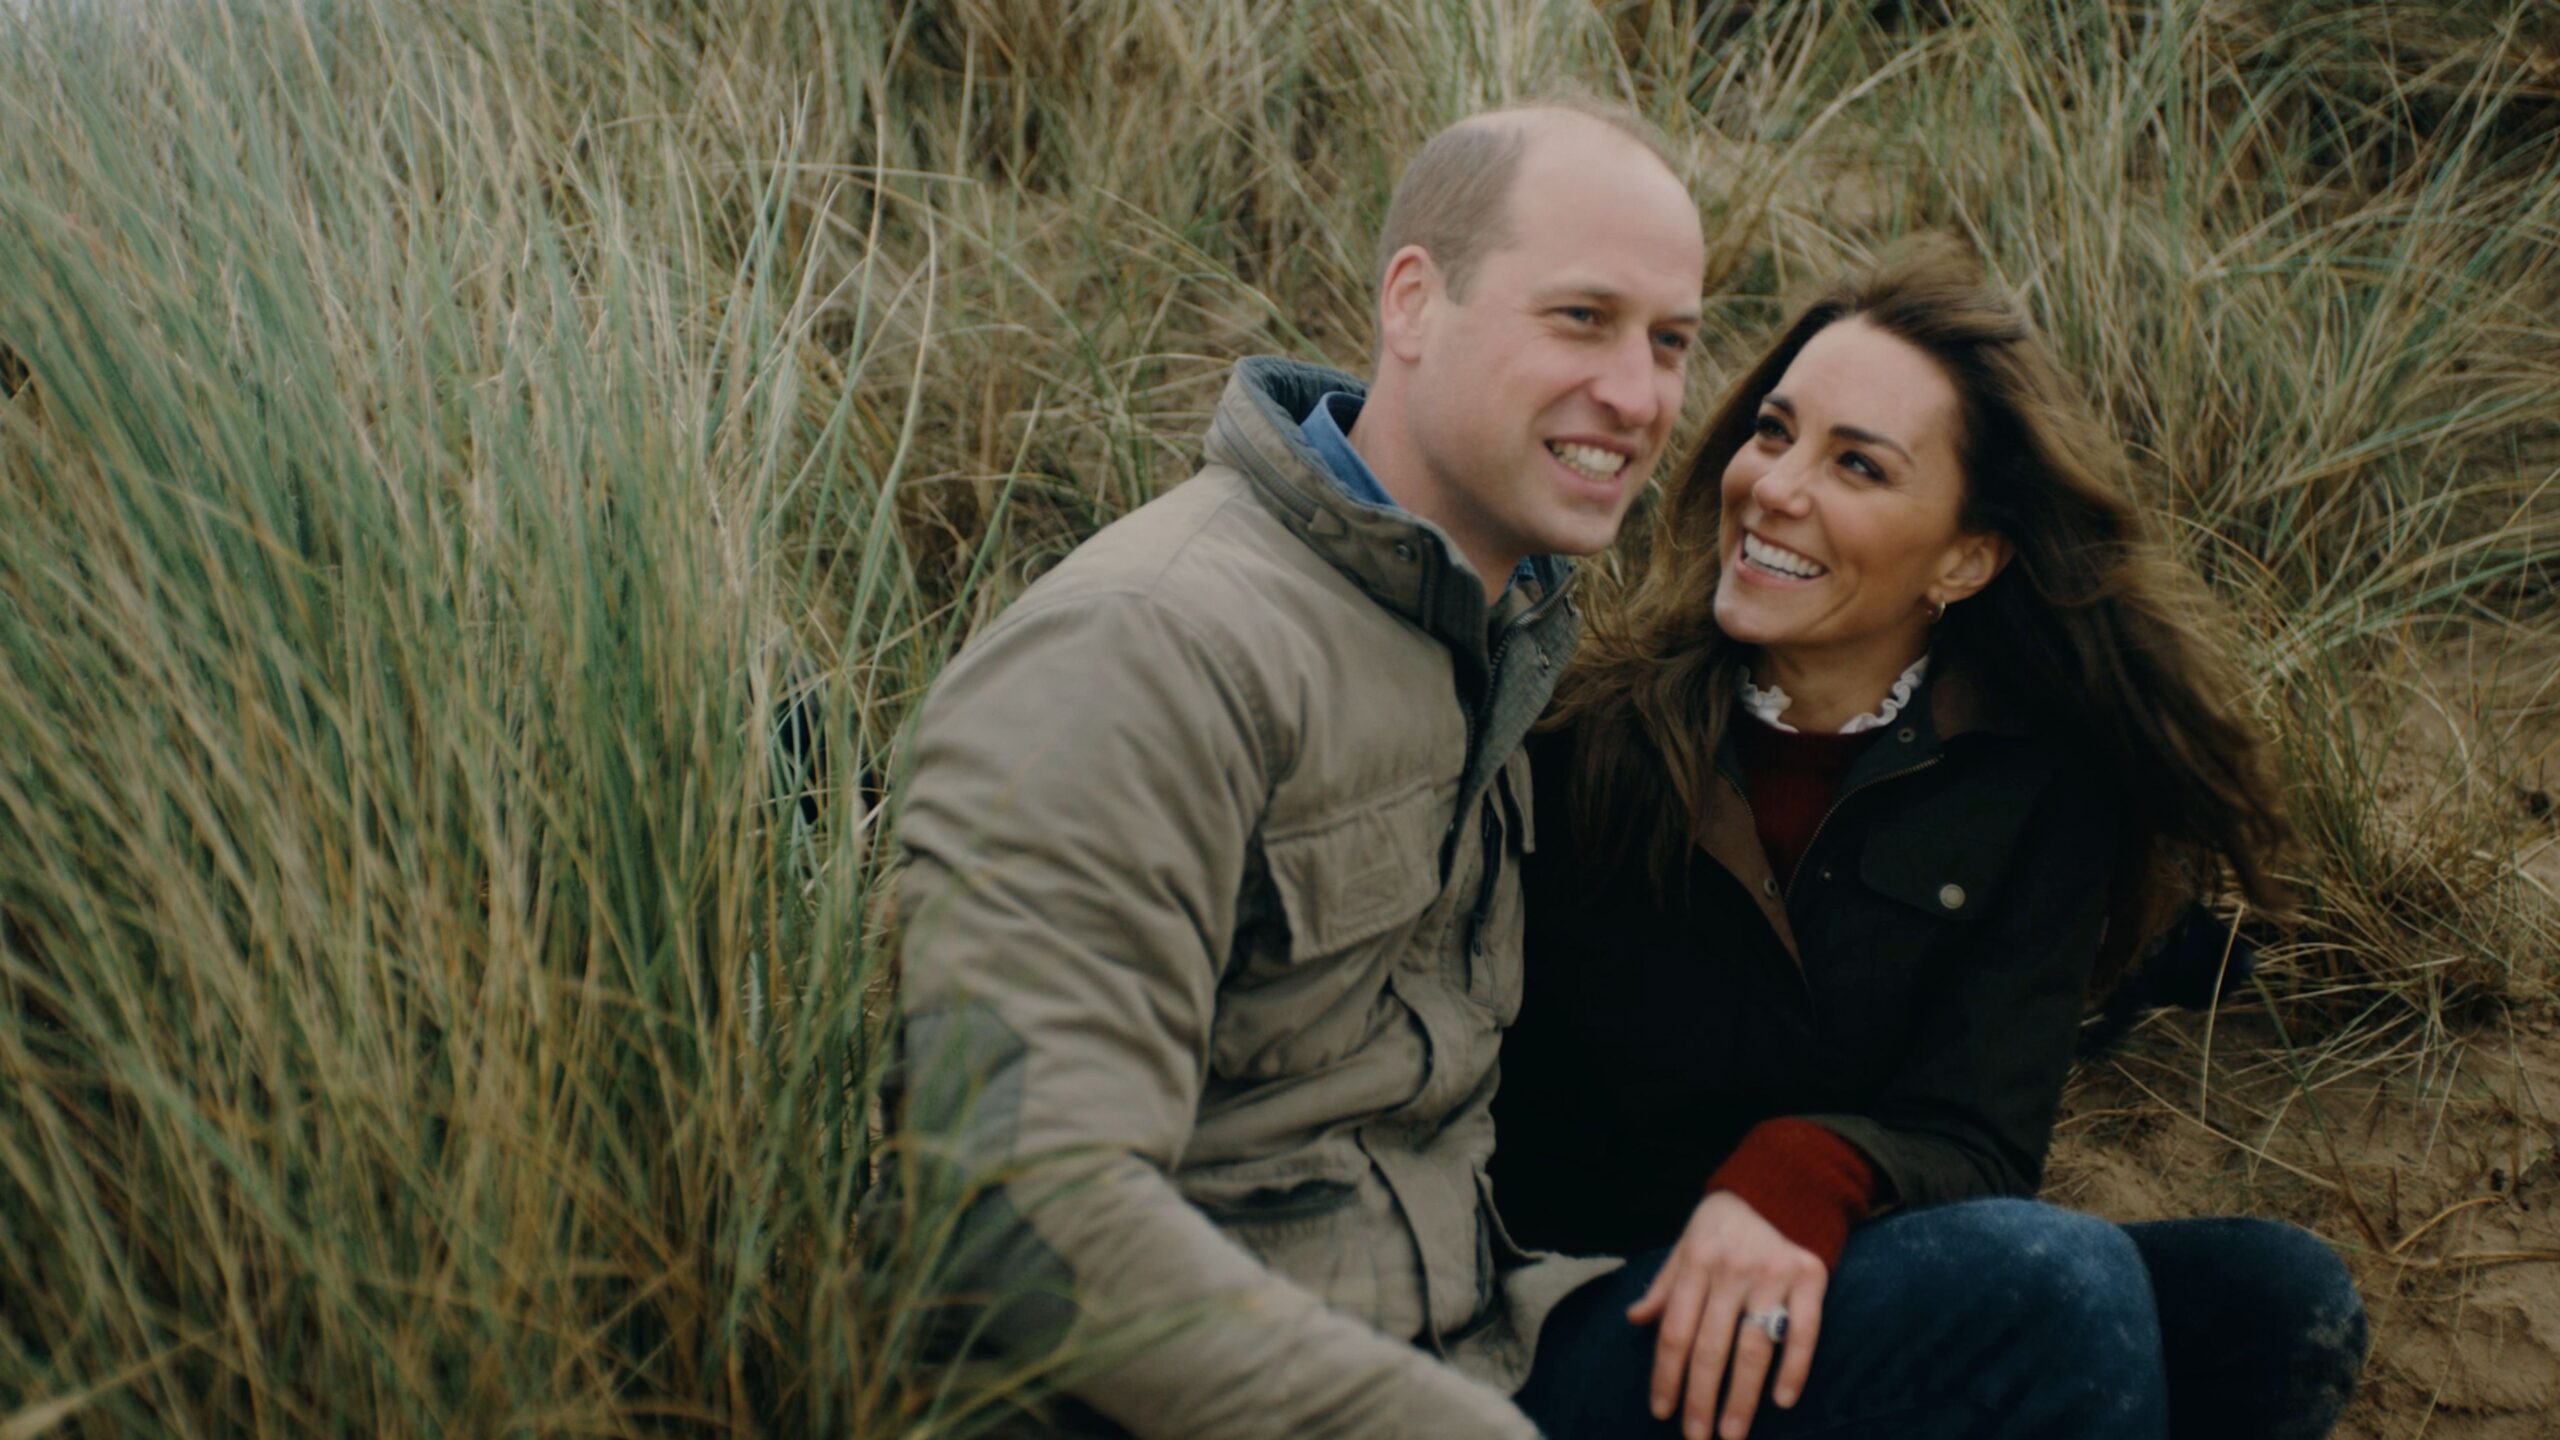 Prince William and Kate 'couldn't be more real' after passionate polo PDA